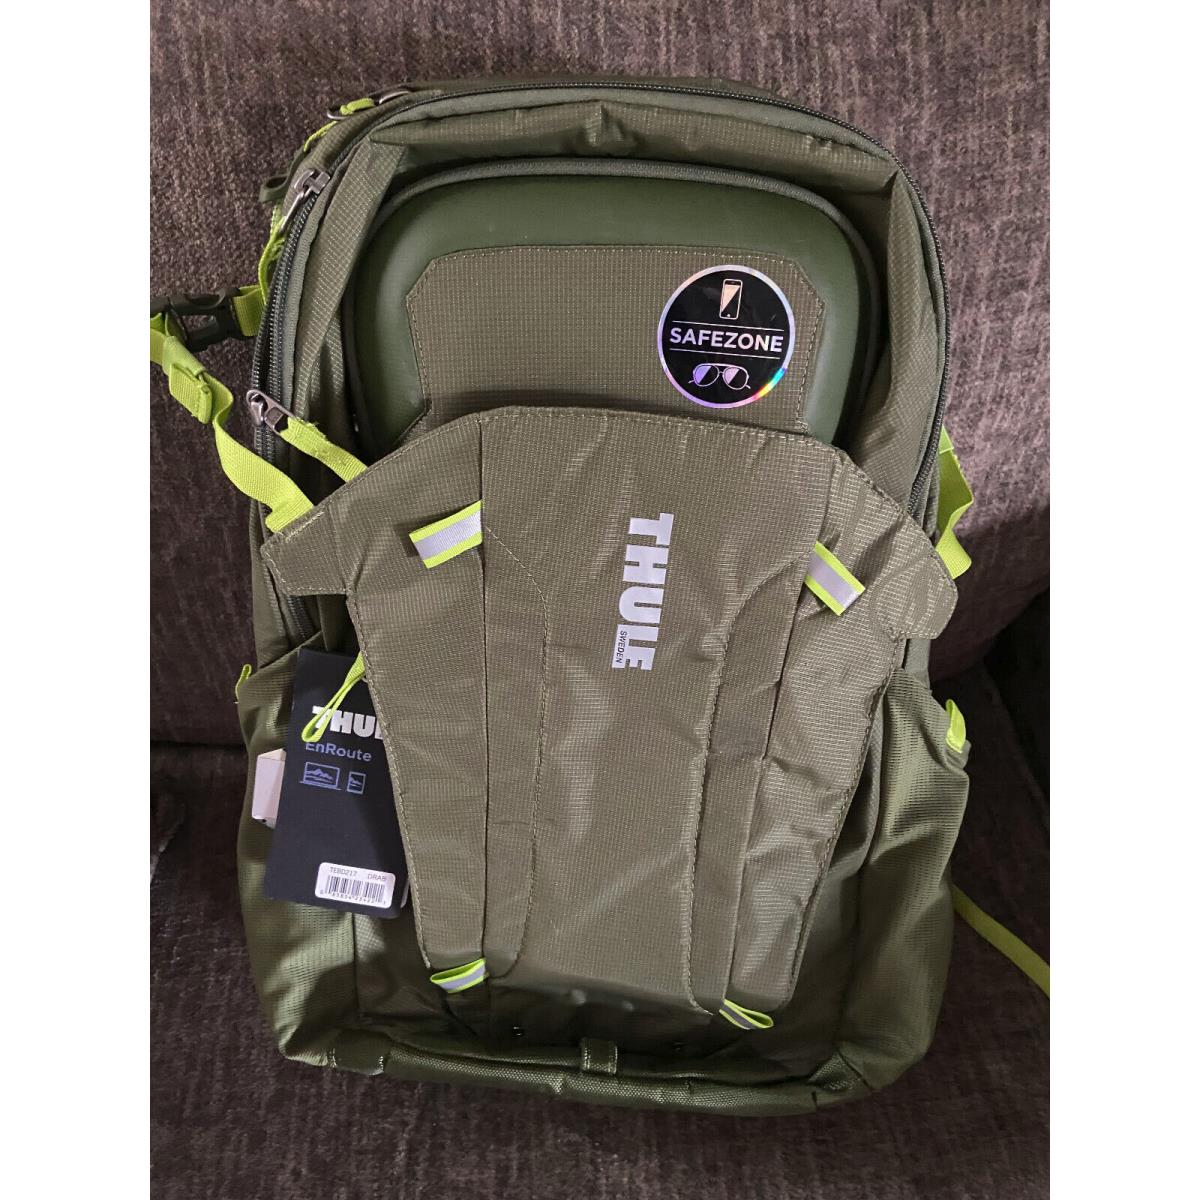 Thule Enroute 15 Laptop Safezone Blur 2 Daypack Backpack